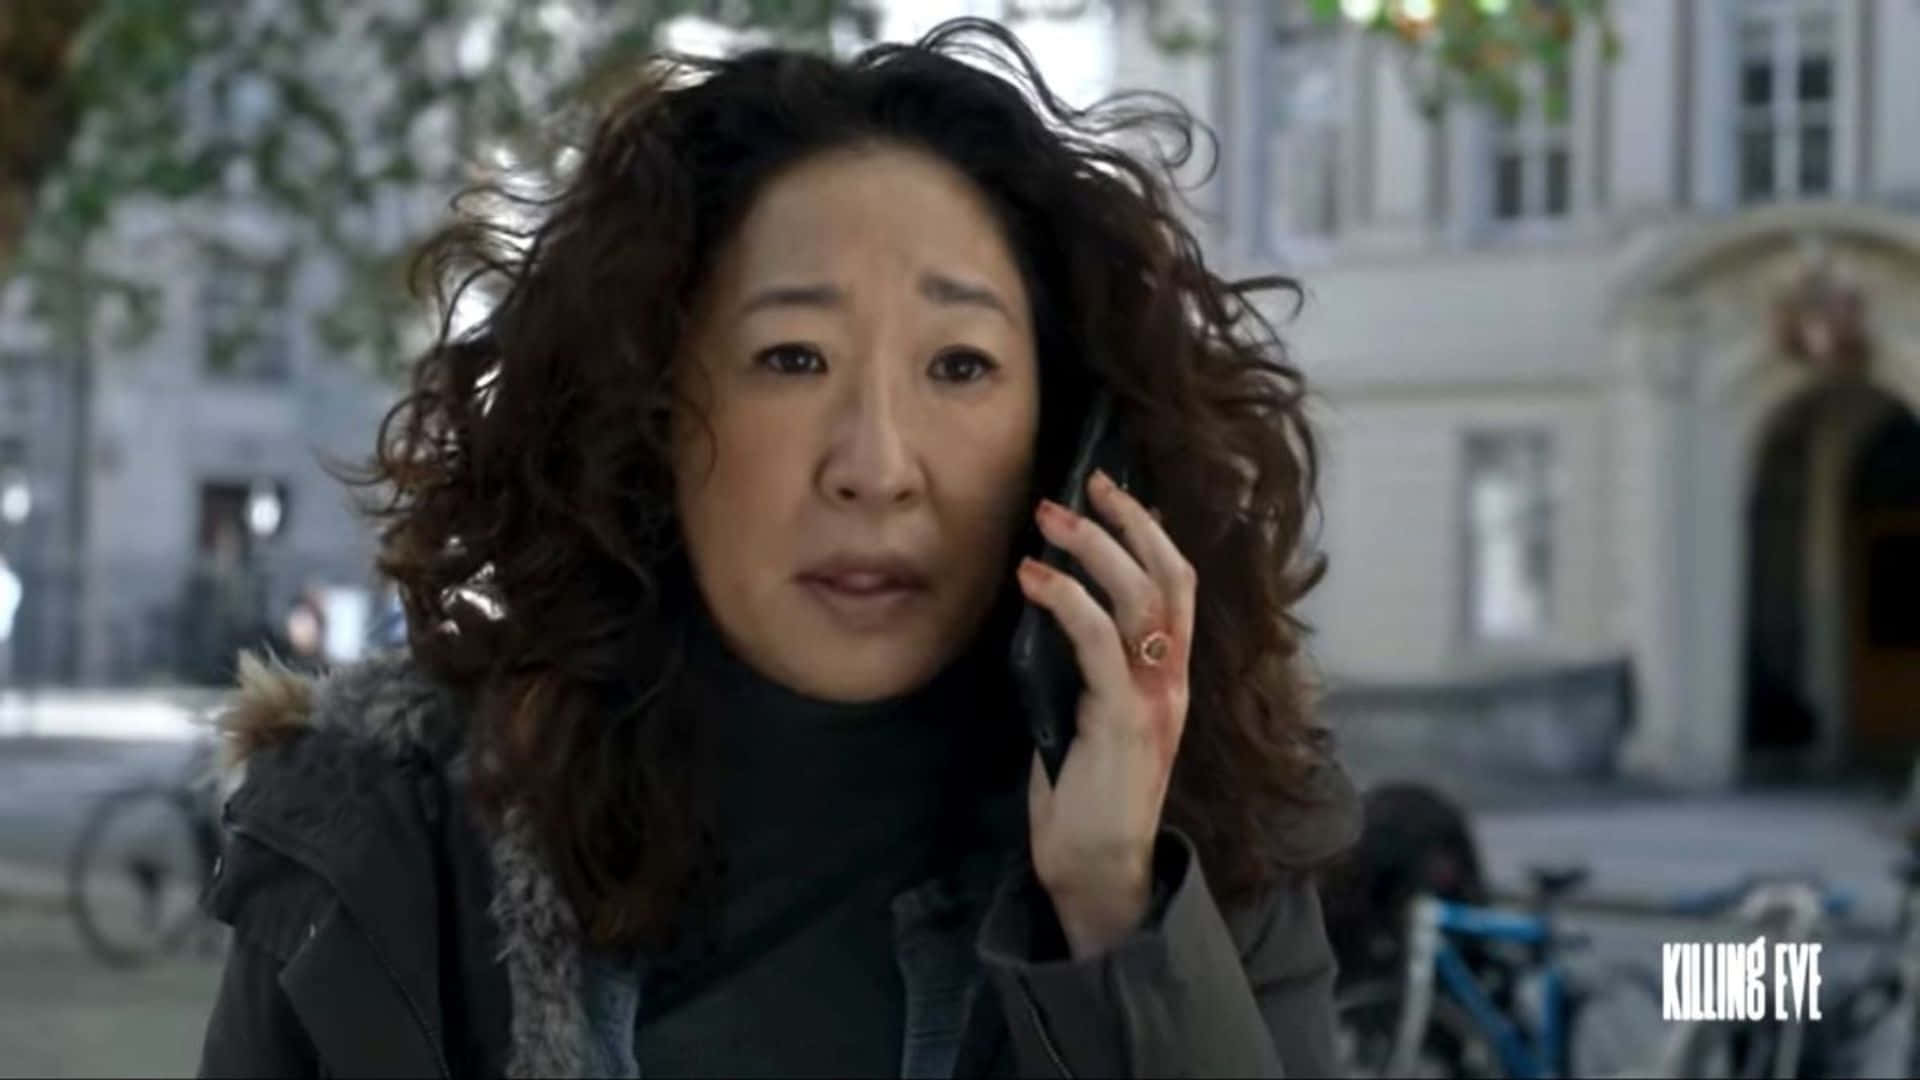 Killing Eve Concerned Phone Call Wallpaper